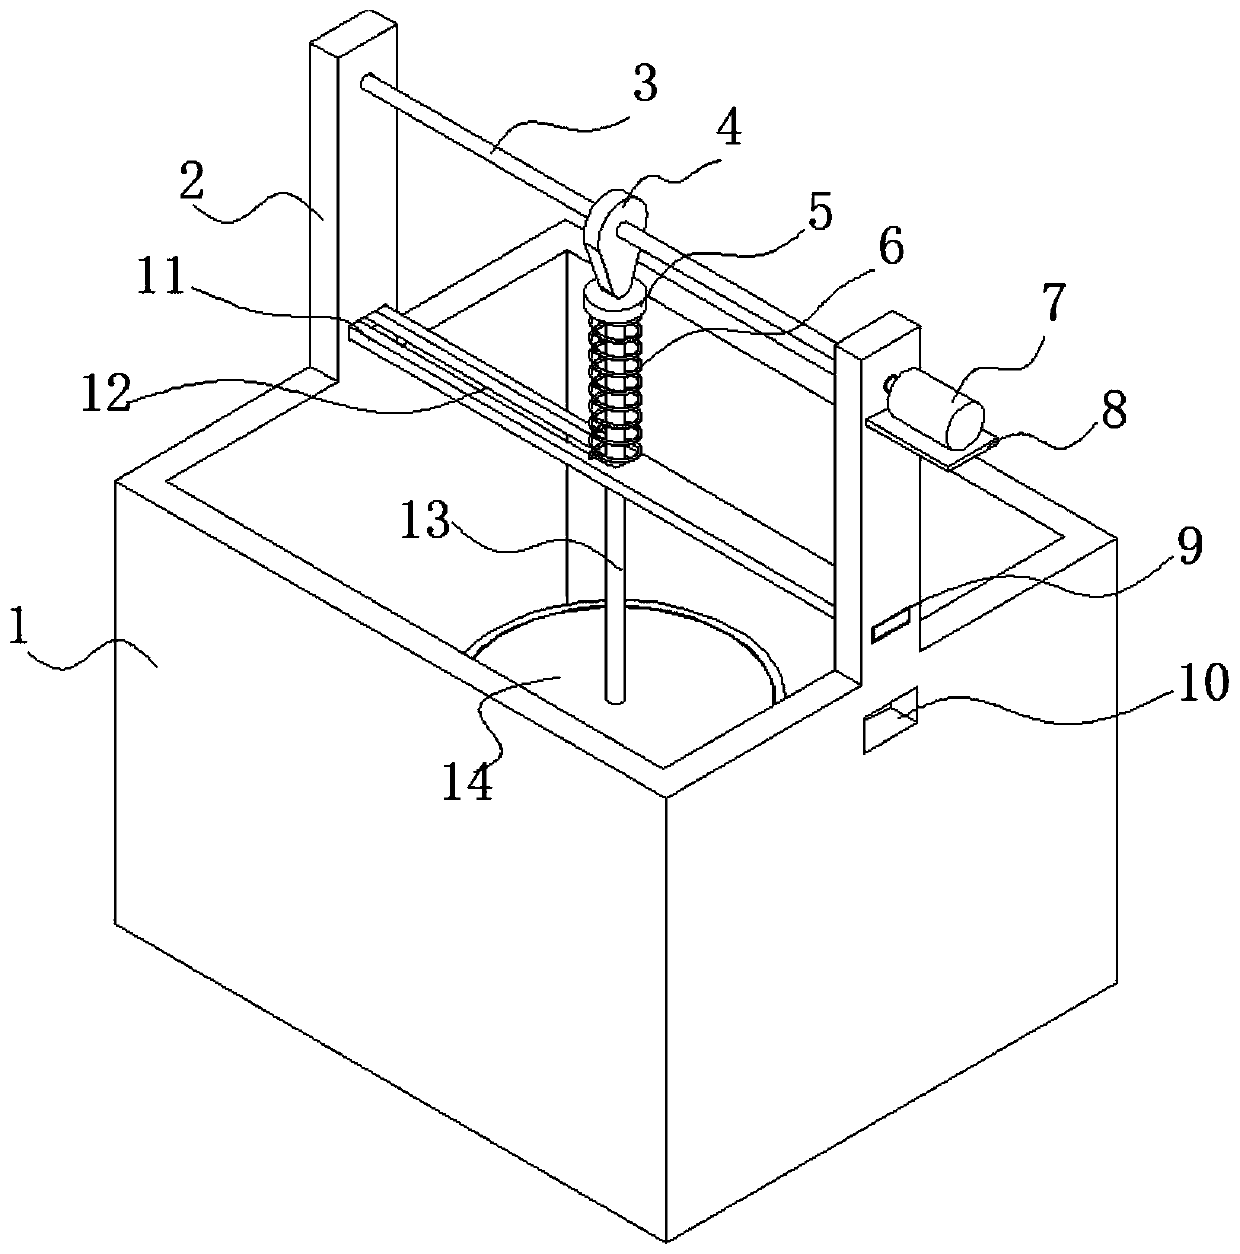 Seed soaking device for vegetable planting